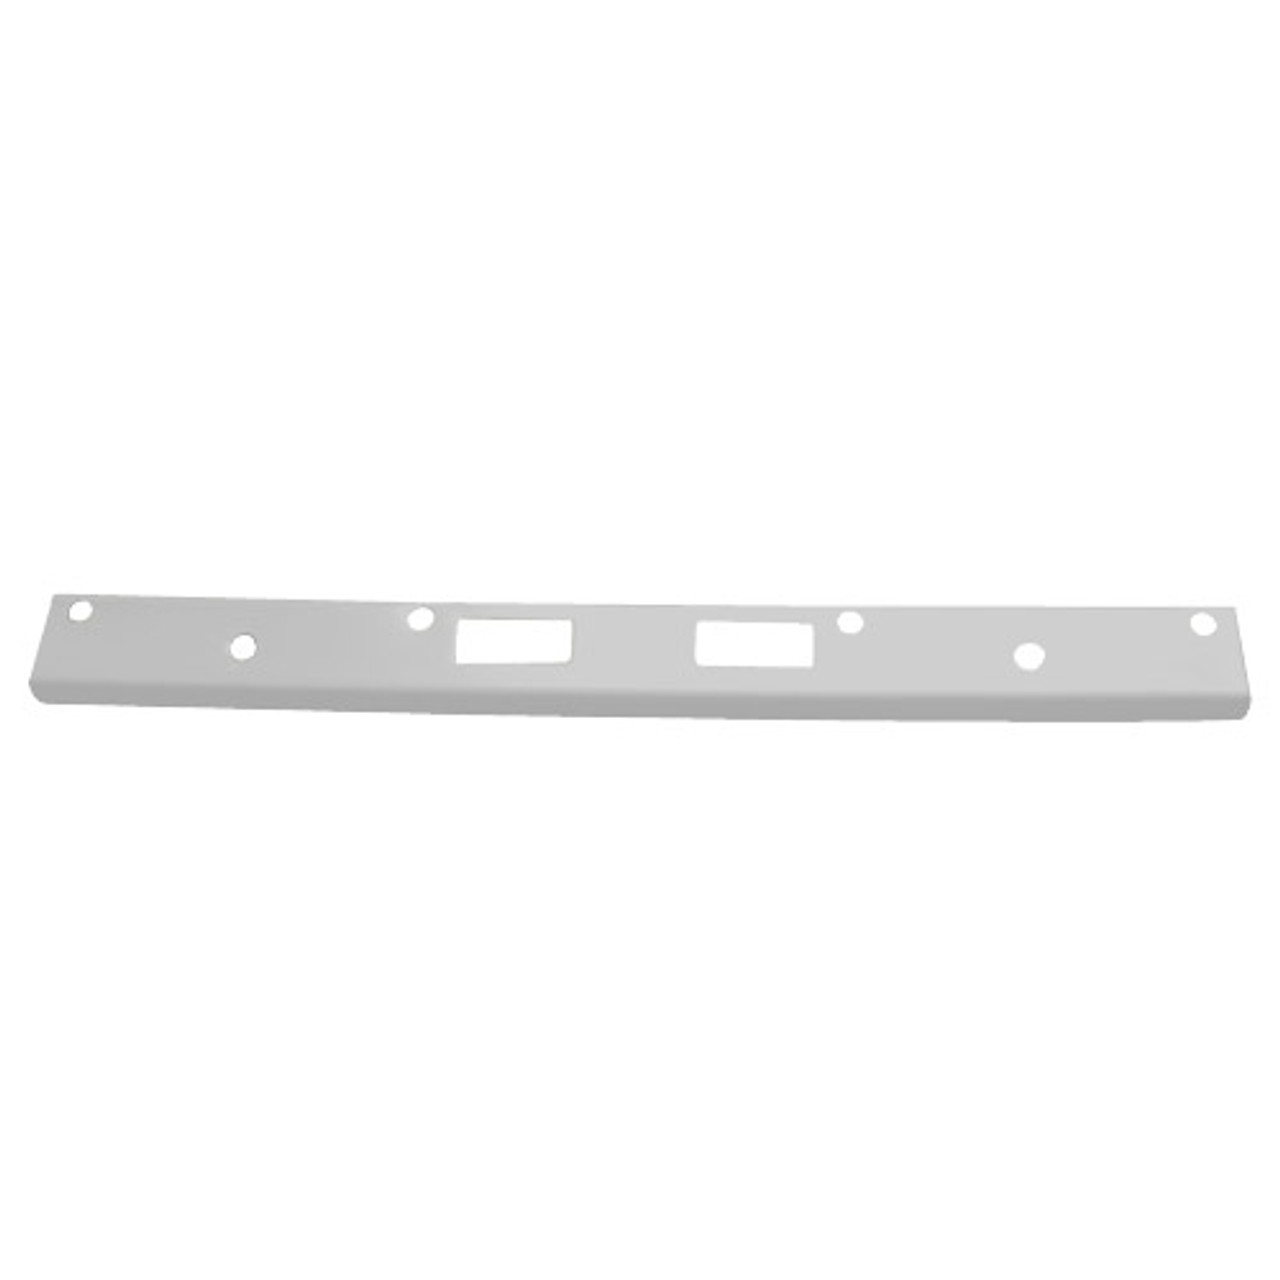 AST-21382-SL Don Jo 18" Security Strike Plate in Silver Coated Finish